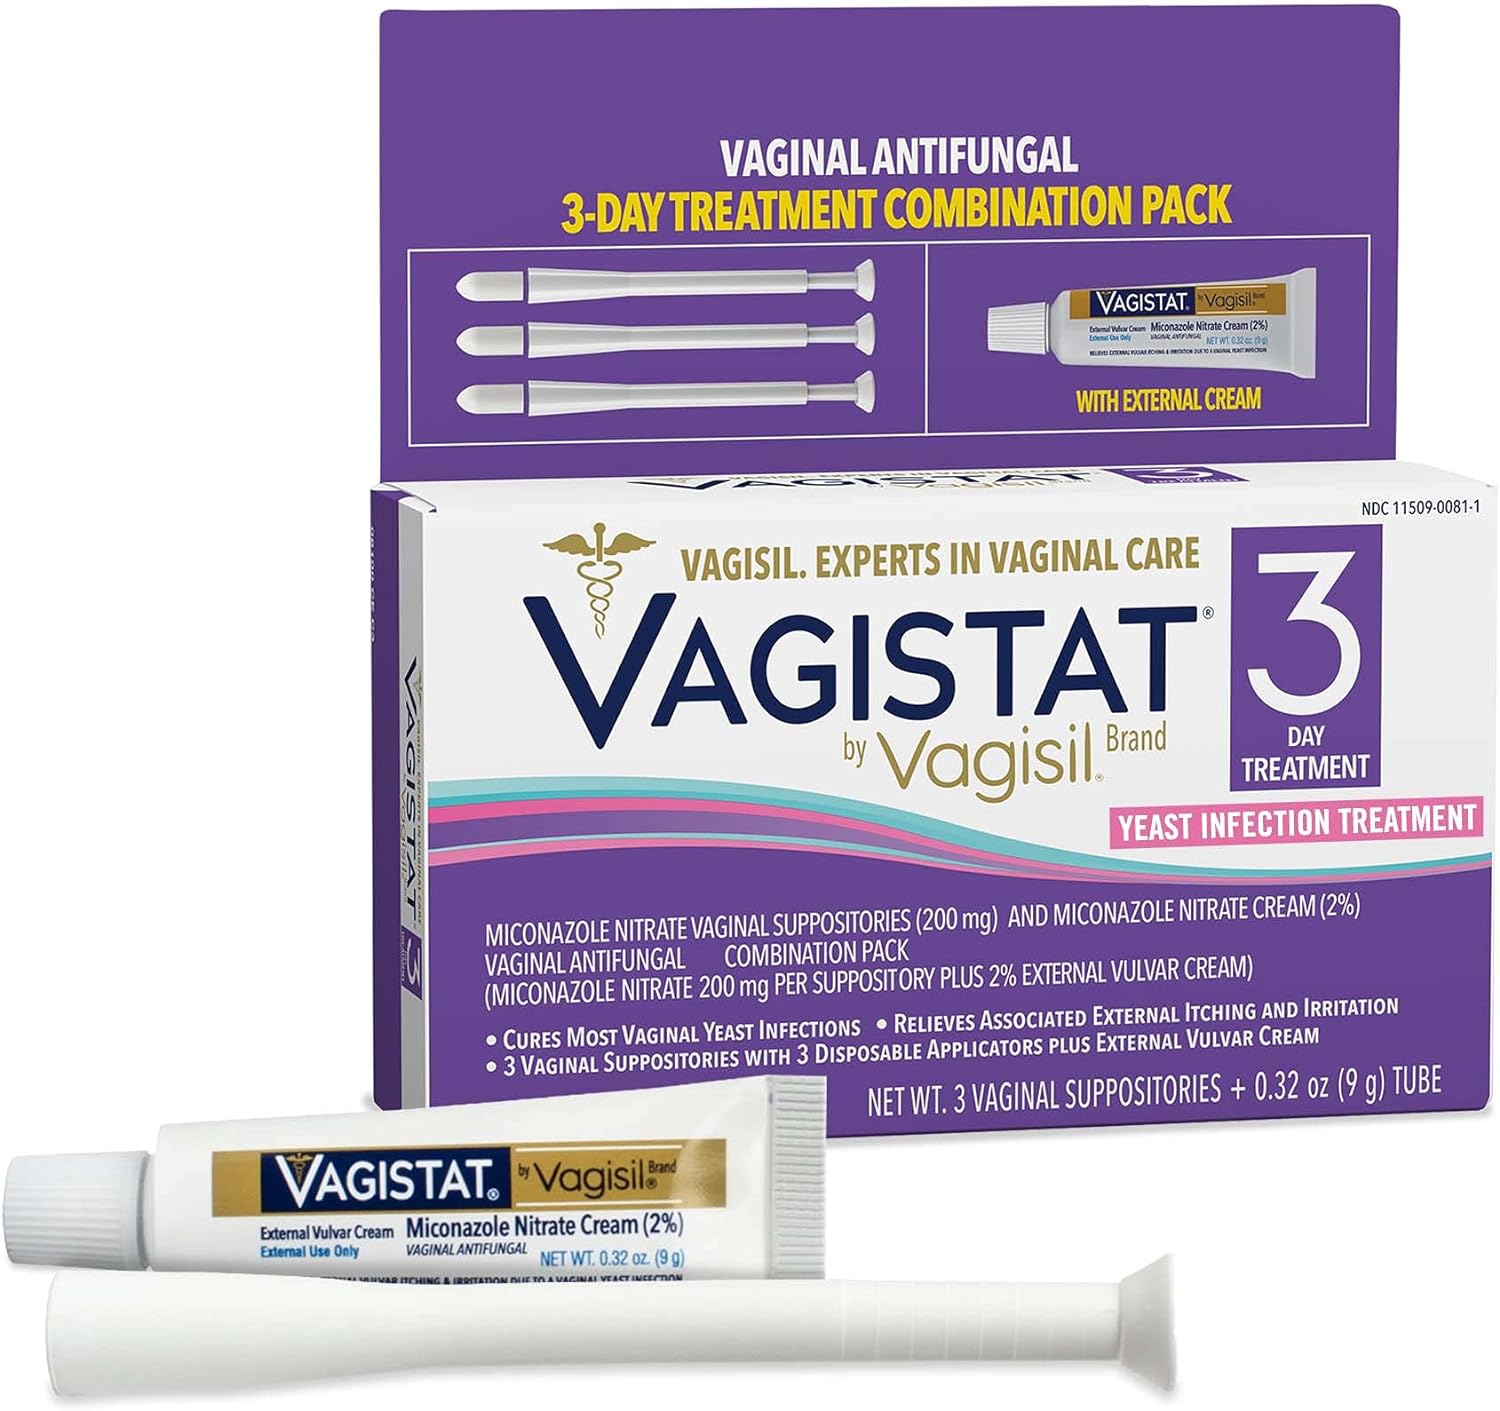 Vagistat 3 Day Yeast Infection Treatment for Women, Relieves External Itching and Irritation - 2% External Miconazole Nitrate Cream, 3 Disposable Suppositories & Applicators, by Vagisil (Pack of 1)